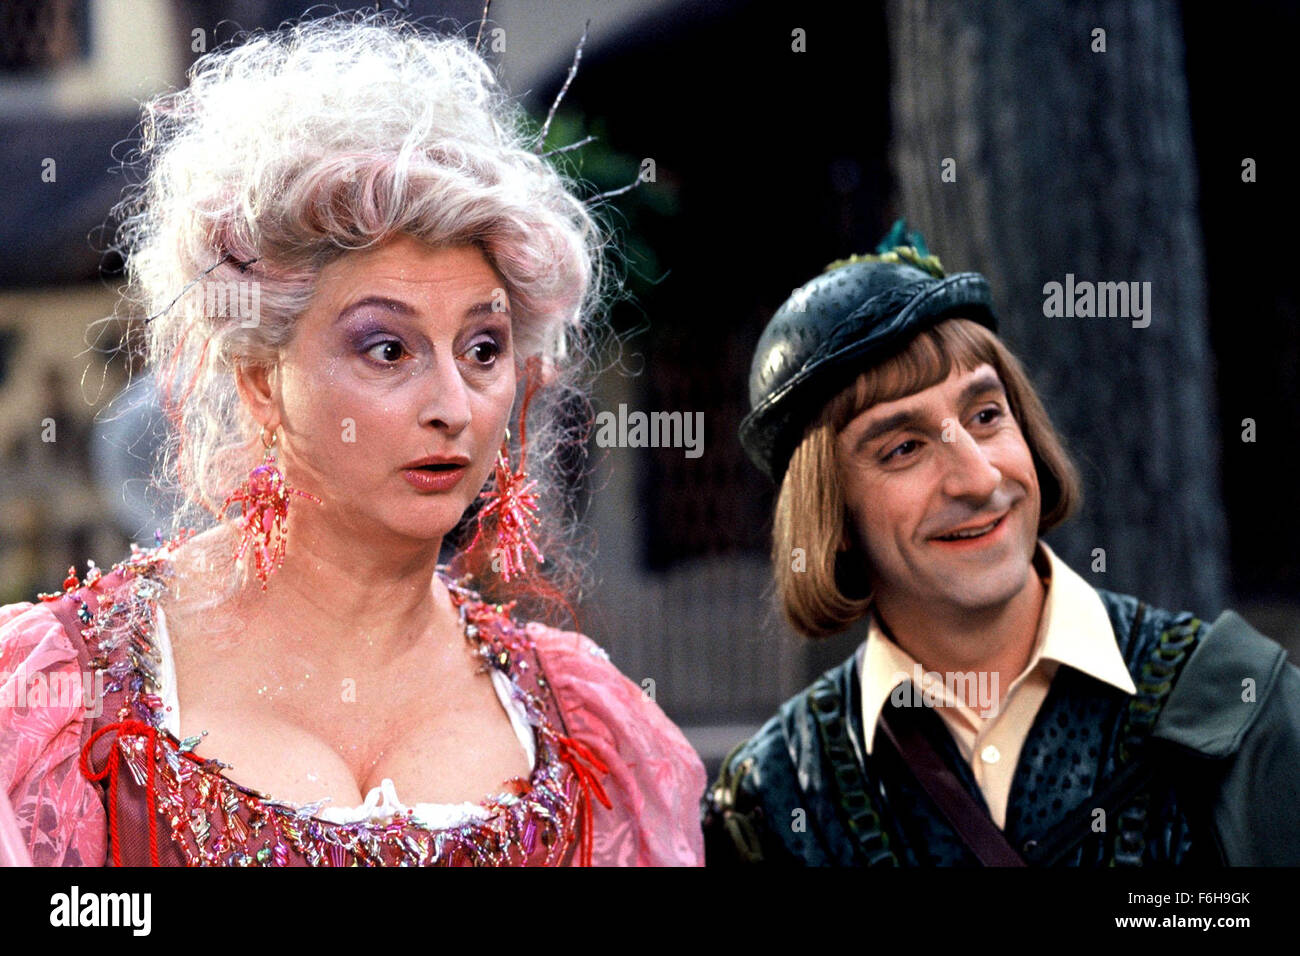 Apr 13, 2002; Montreal , Quebec, Monaco;  MARTIN DRAINVILLE and PIERRETTE ROBITAILLE star as Ludovic/Louis and Carabosse/Fee Marraine/ Madame Bossy in the family fantasy/comedy 'Alice's Odyssey - L'Odyssee d'Alice Tremblay' directed by Denise Filiatrault. Stock Photo